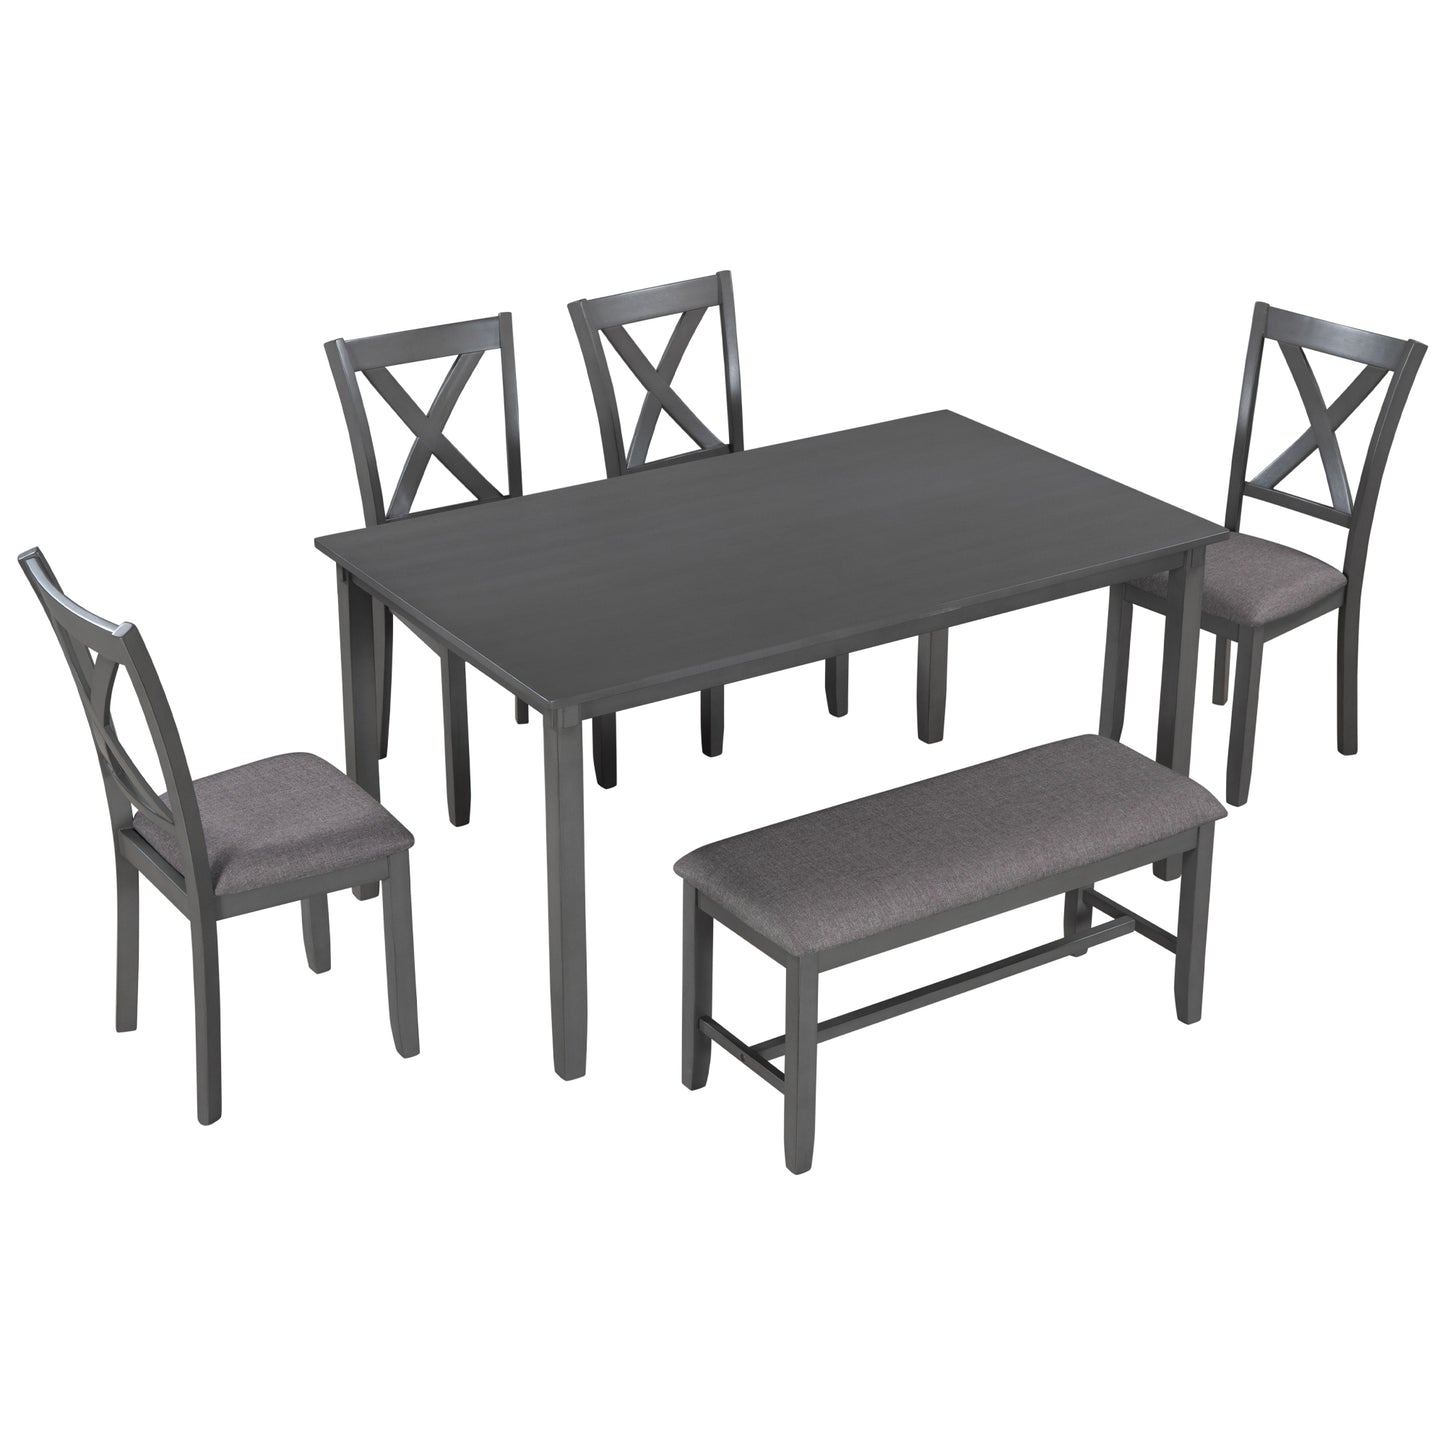 TREX 6-Piece Kitchen Dining Table Set Wooden Rectangular Dining Table